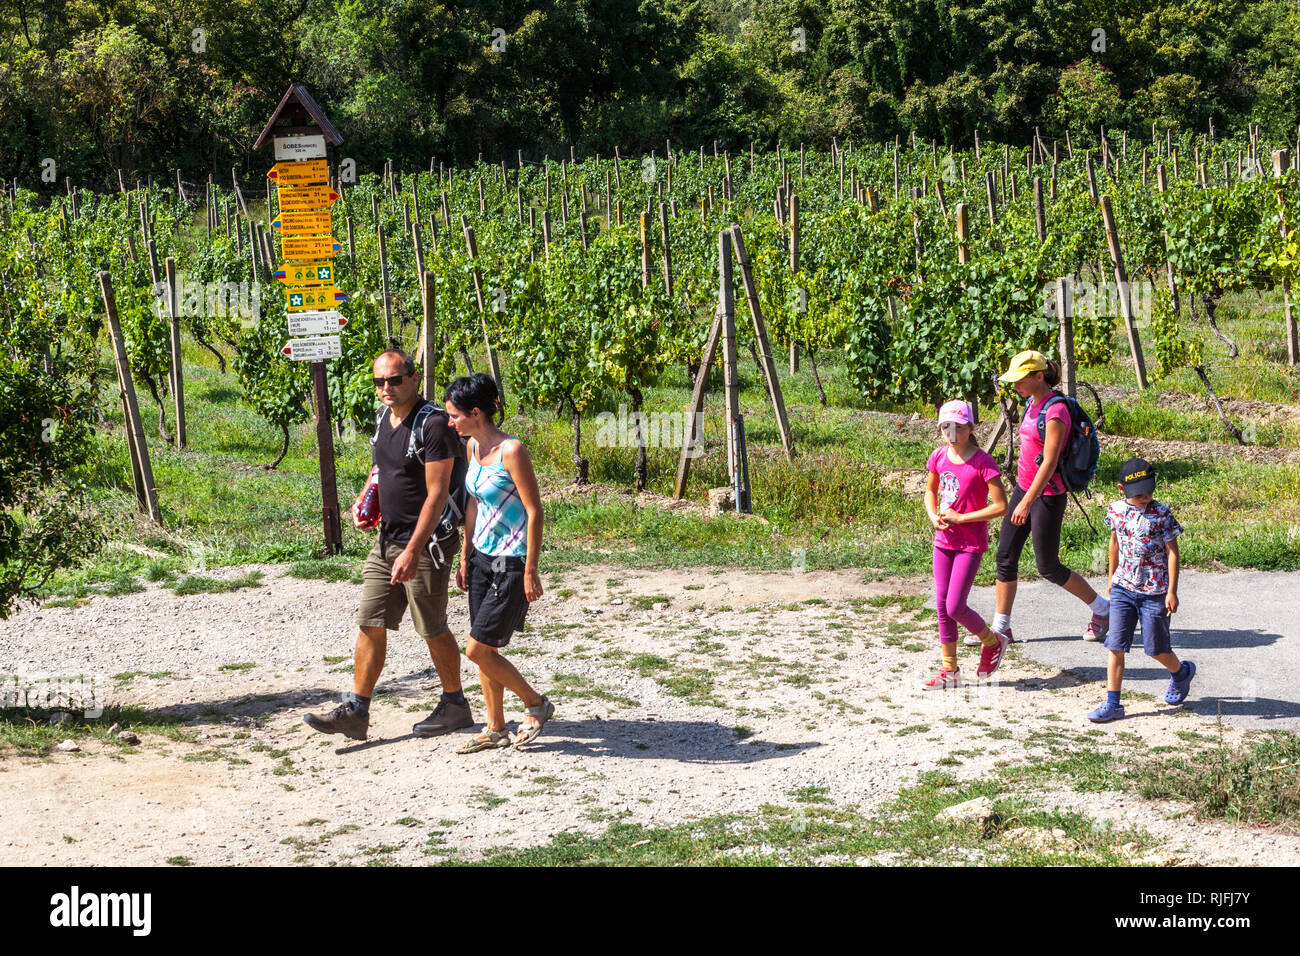 Sobes vineyard, Family on a trip between vineyards in the Podyji National Park, South Moravia, Czech Republic Moravian wine trail Stock Photo